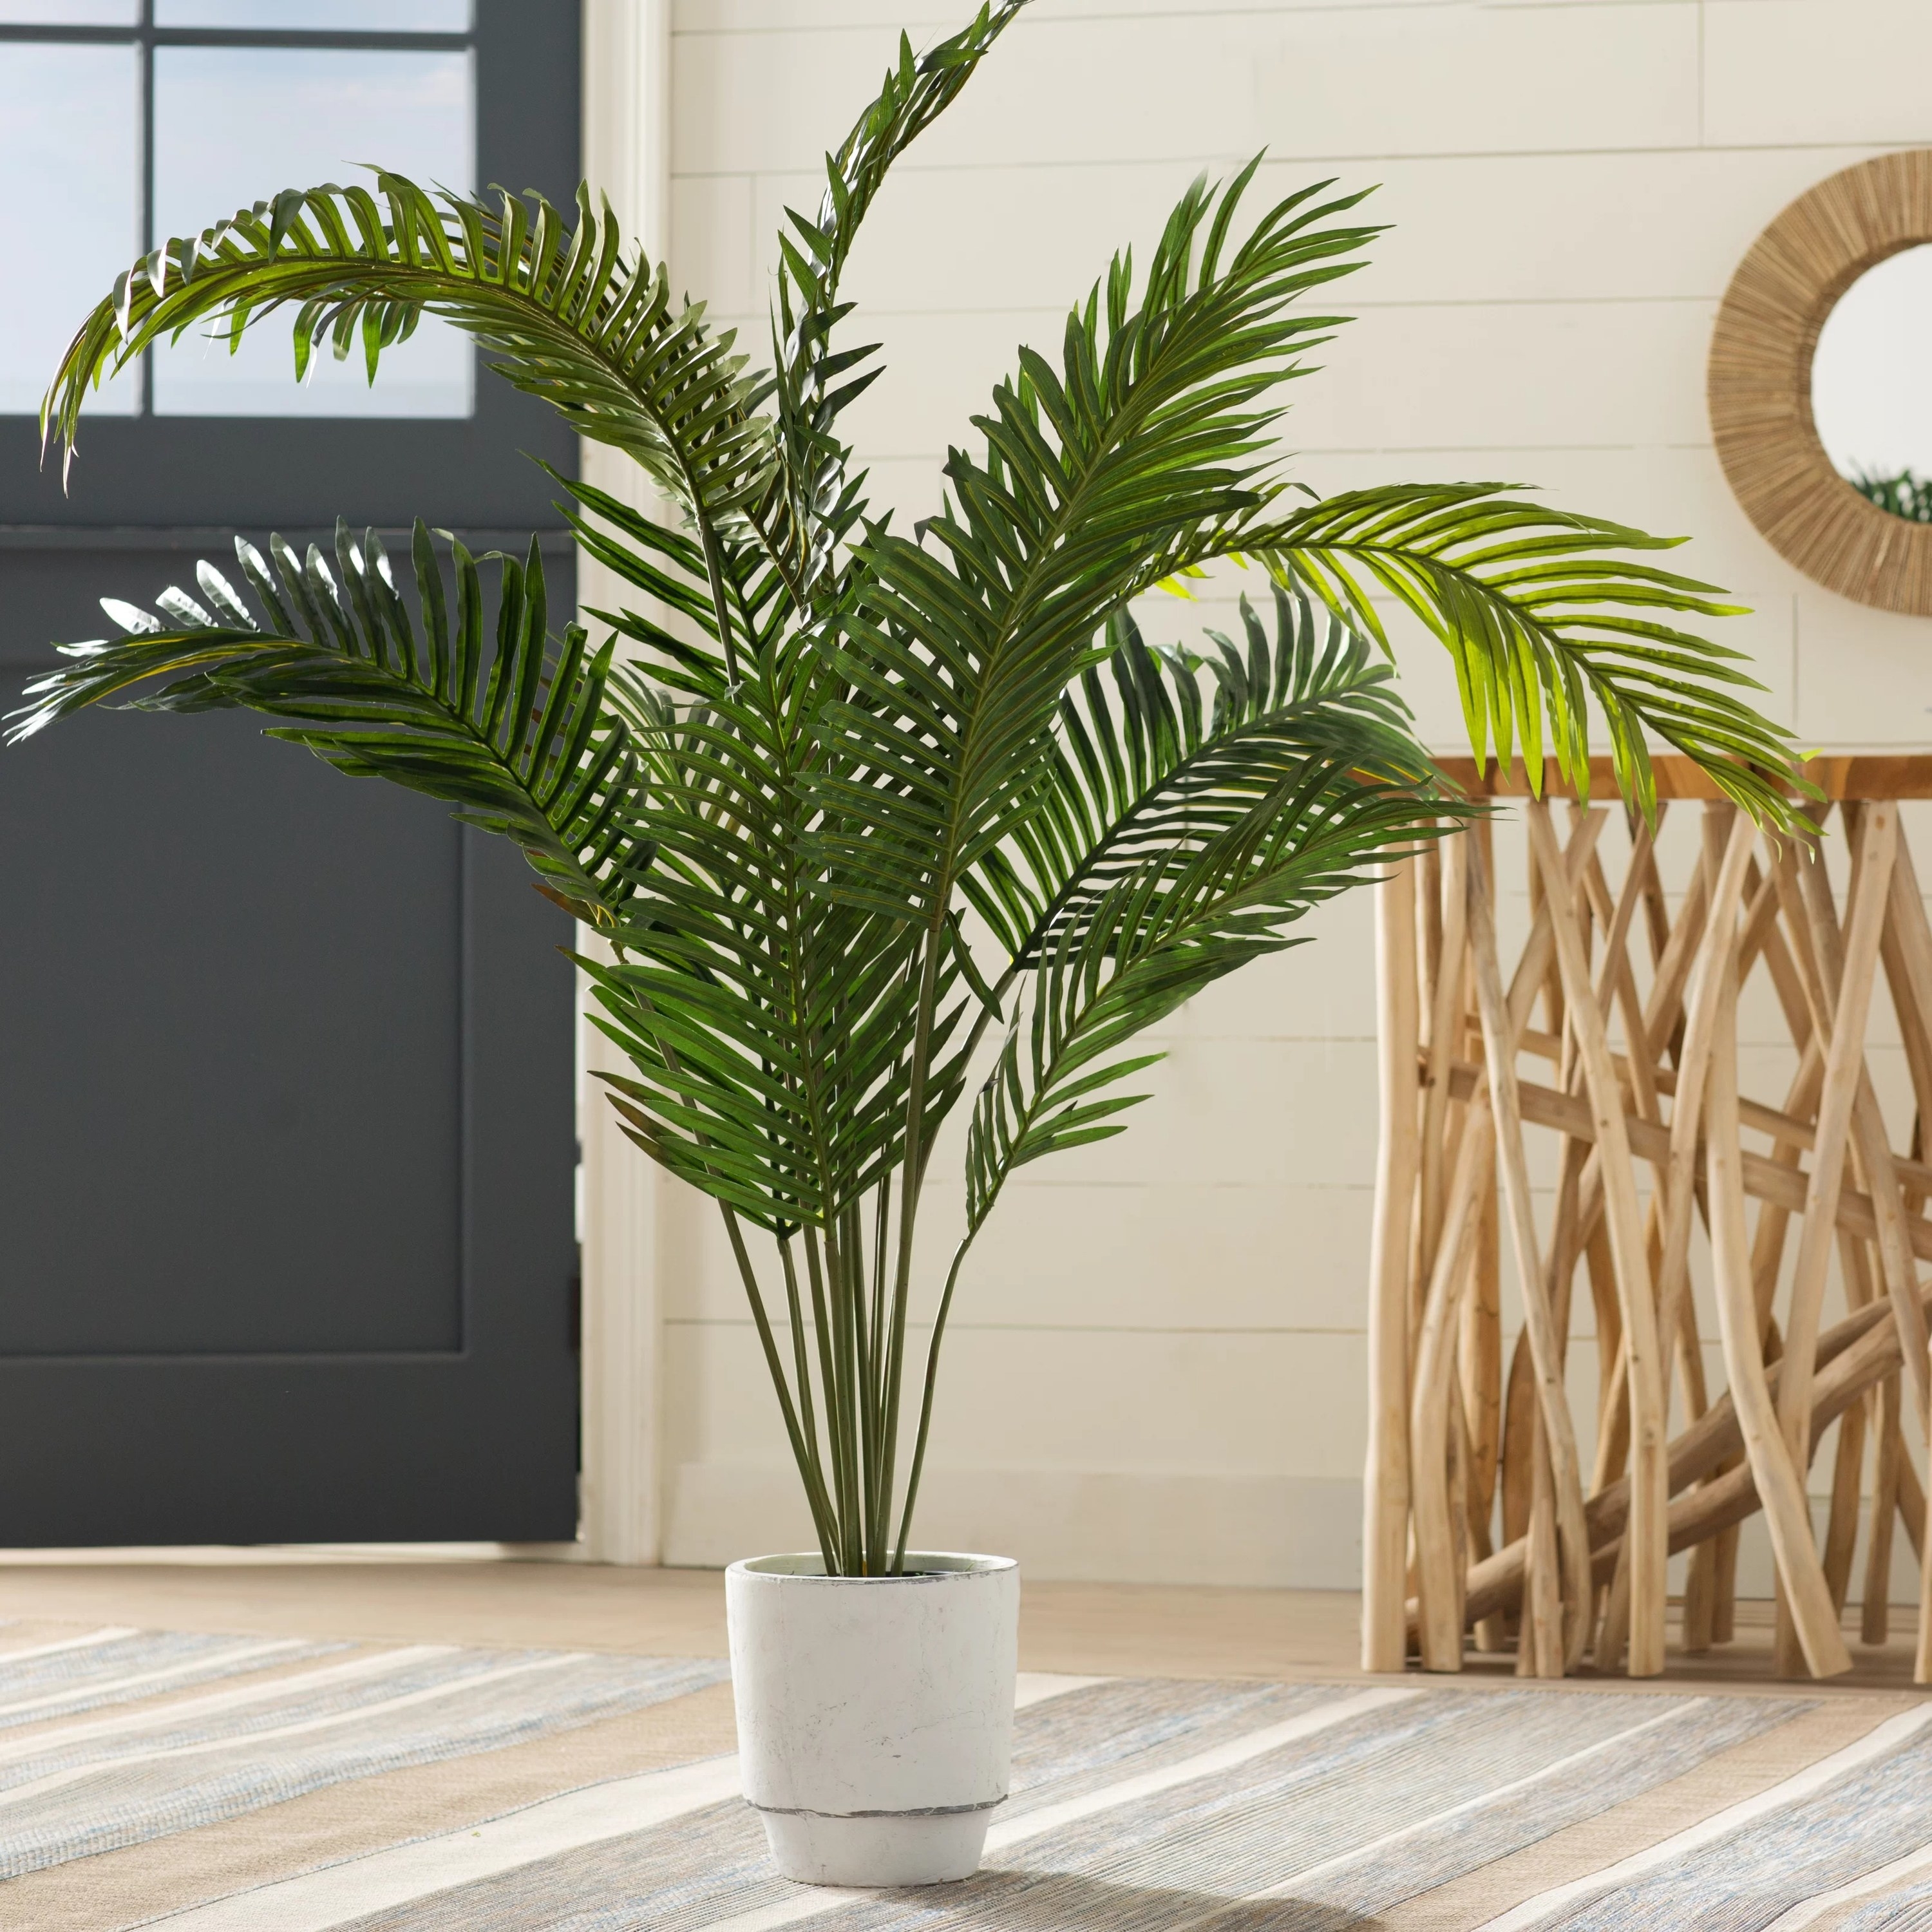 The faux palm plant in a planter, in a living room